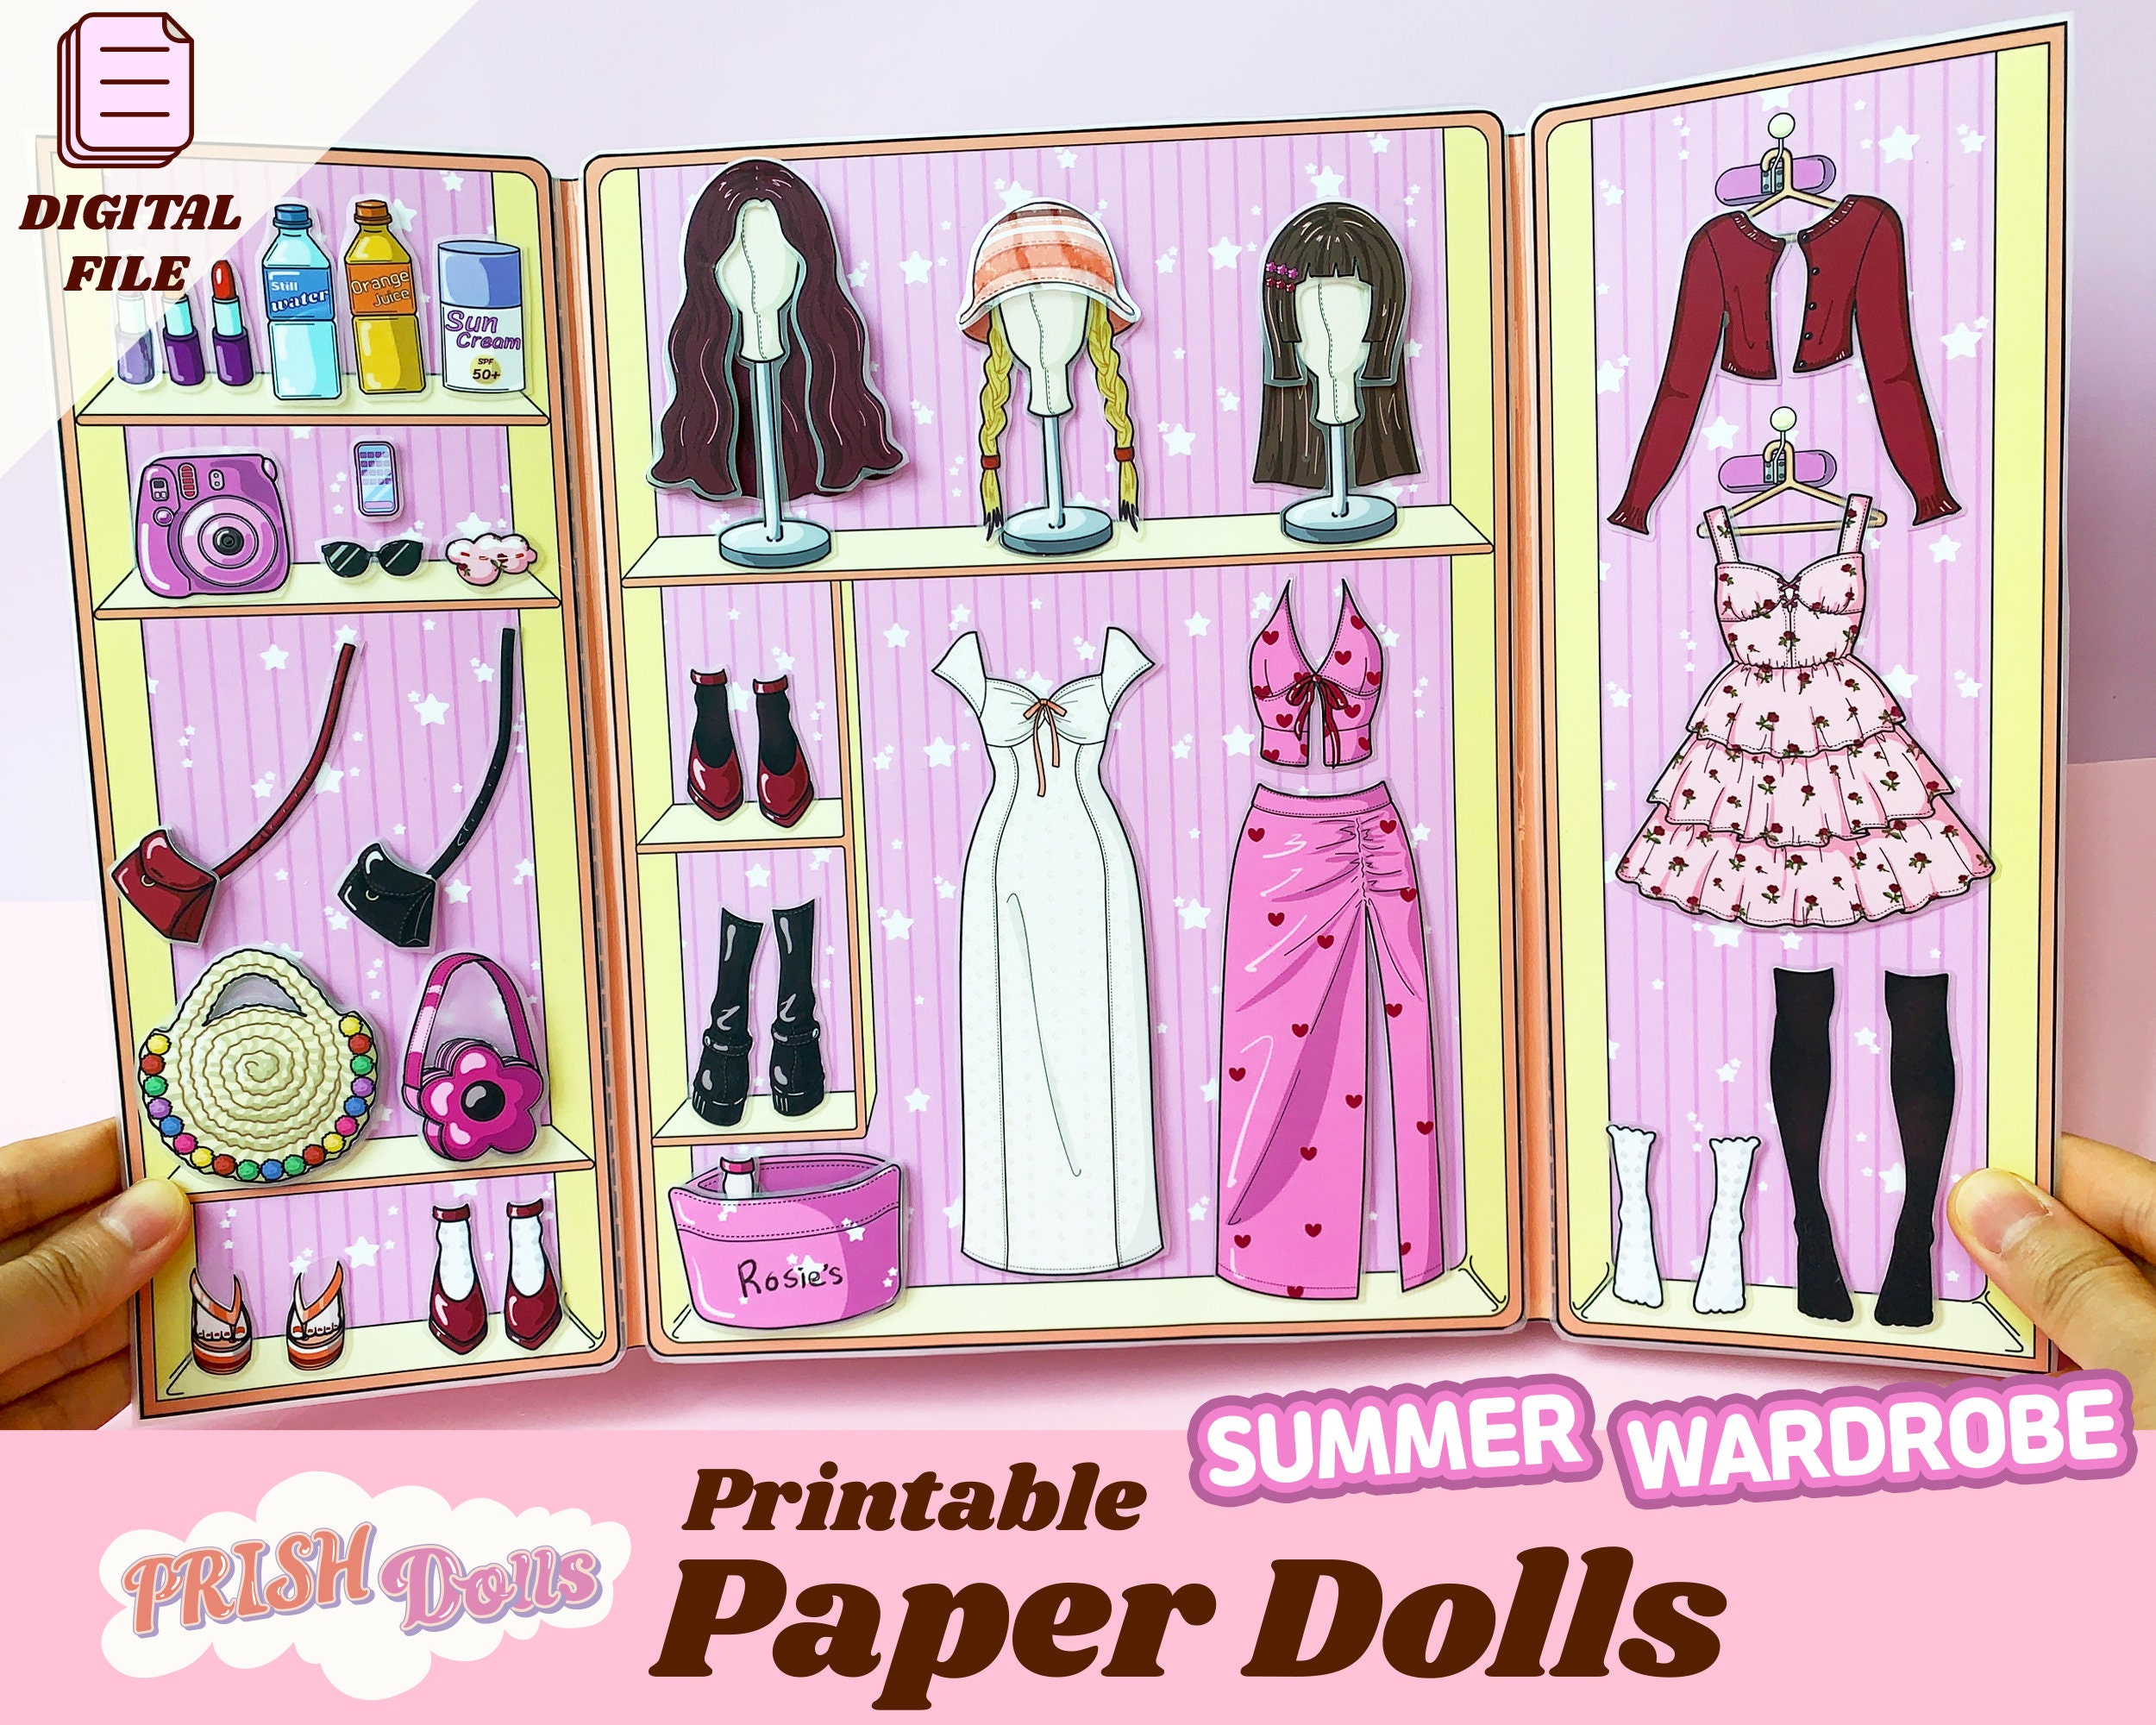 American Girl Crafts Paper Doll Fashion Set~Four Paper Dolls Over 100  Clings